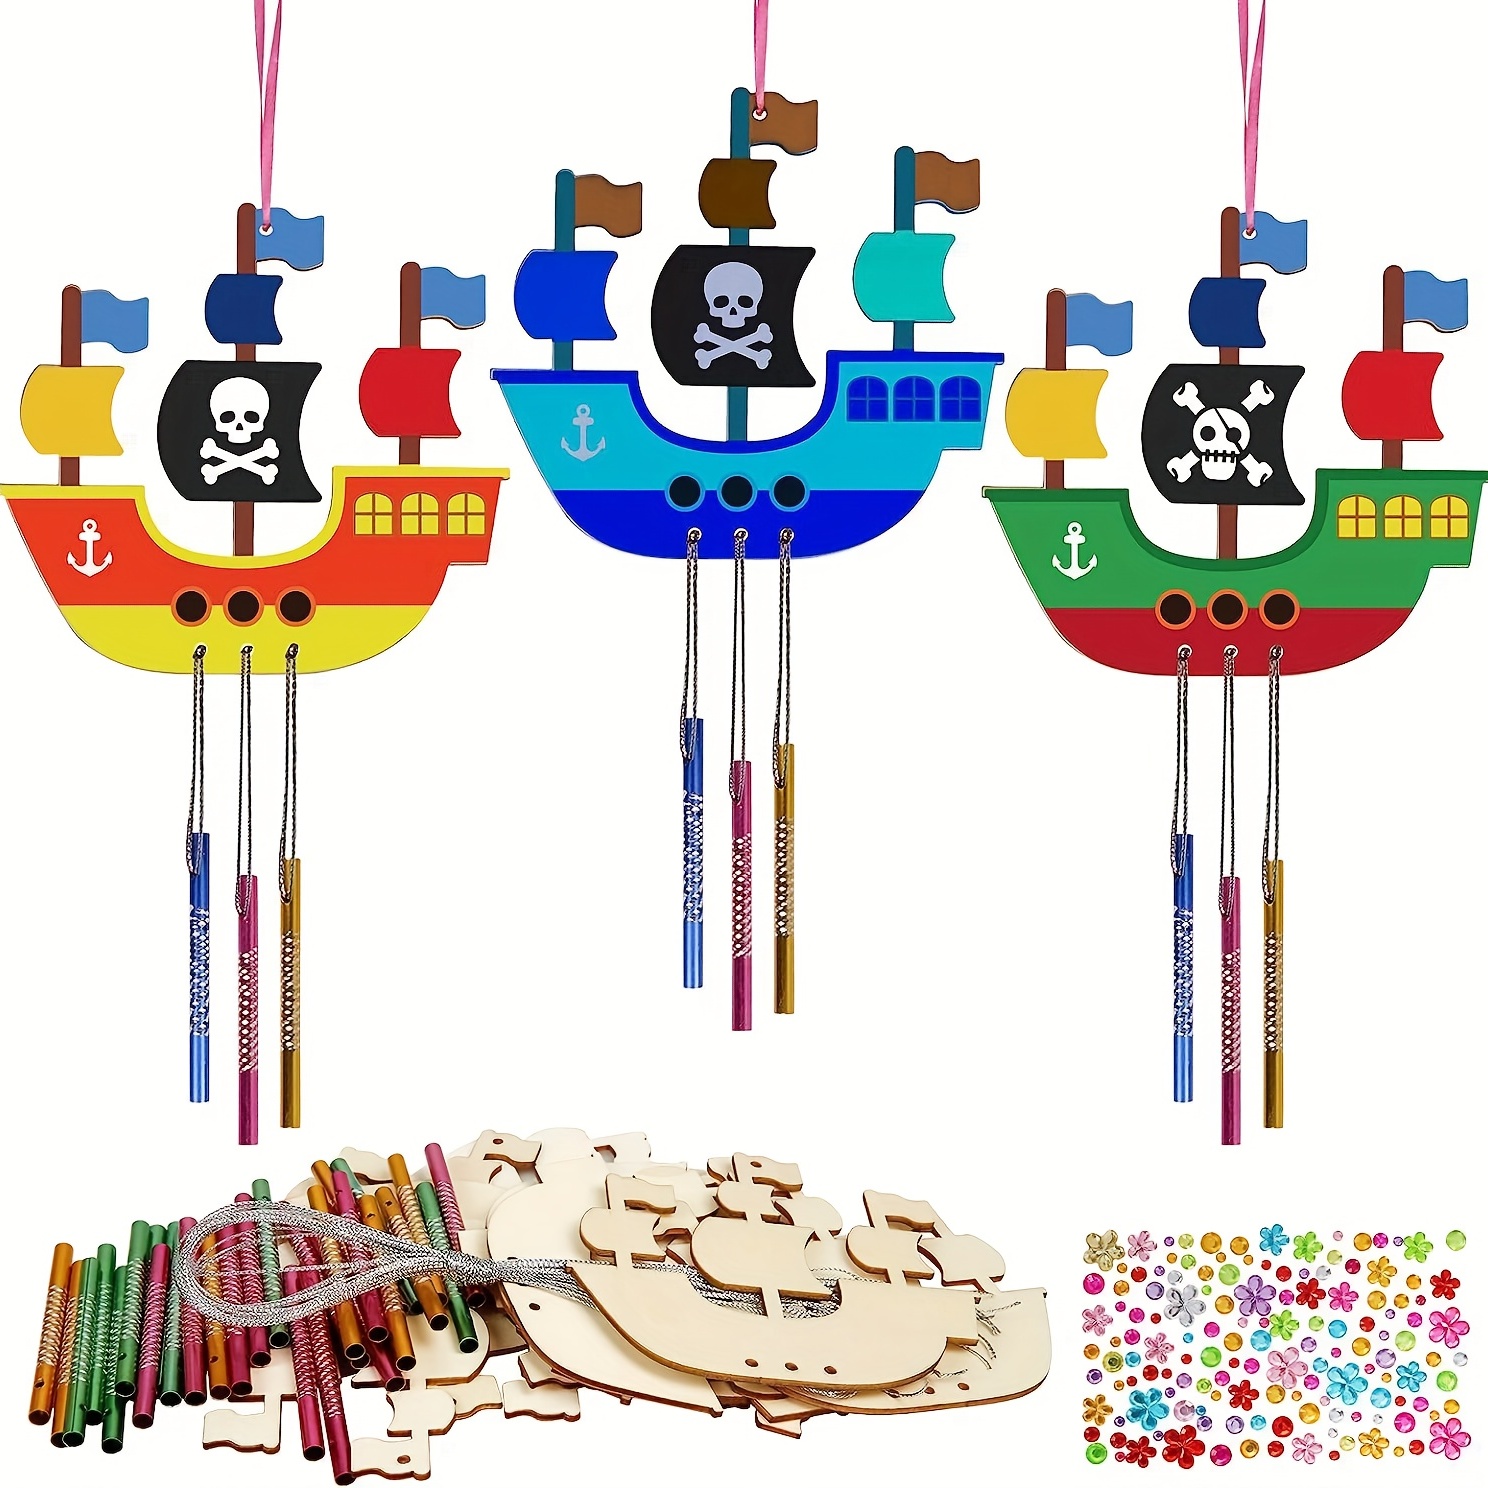 Color Your Own Mother's Day Wind Chimes Craft Kit - Makes 12